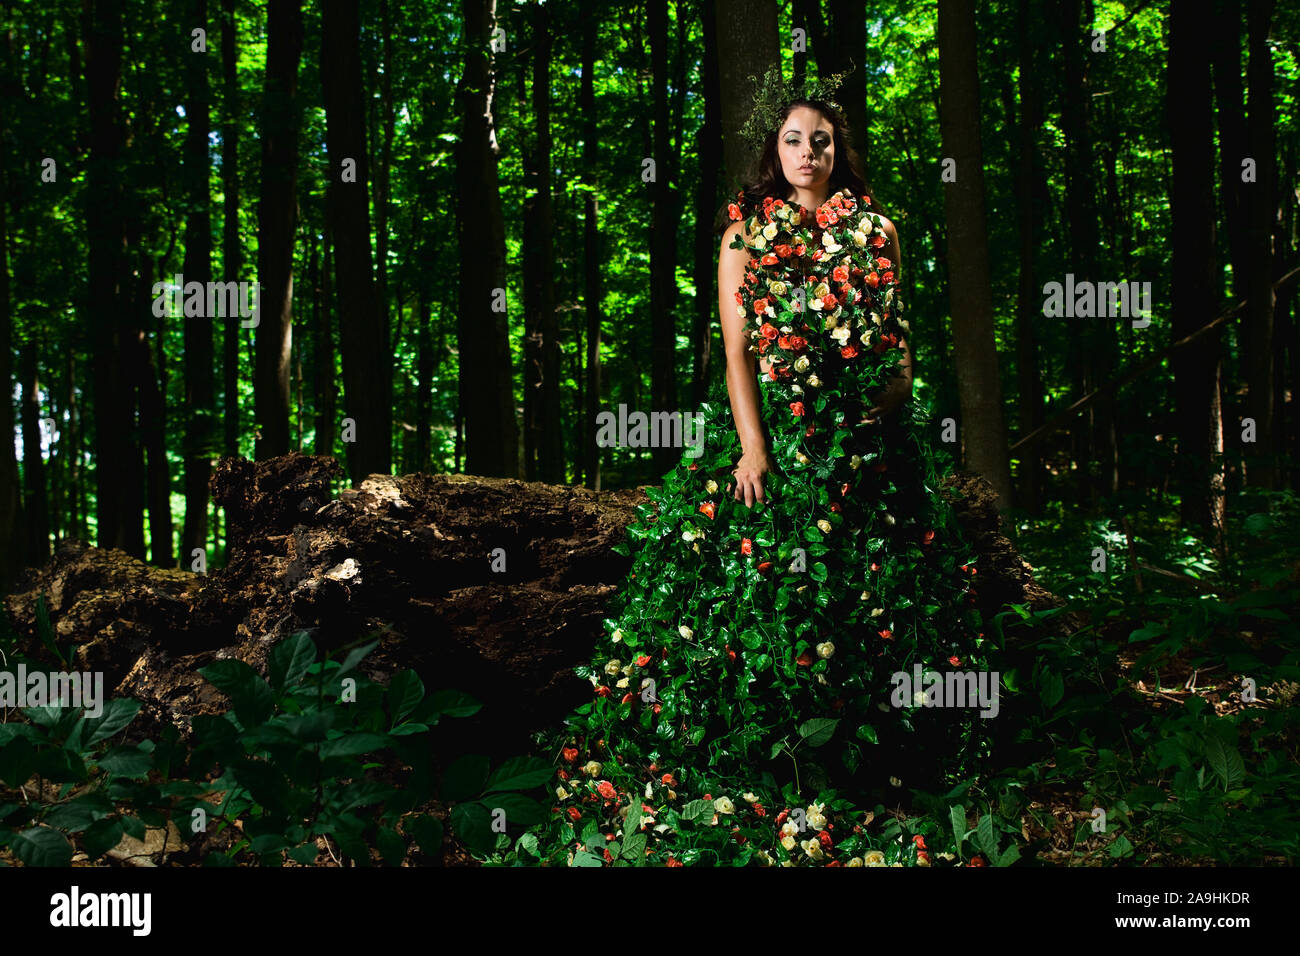 Outdoor high fashion of woman in dress made of leaves and roses Stock Photo